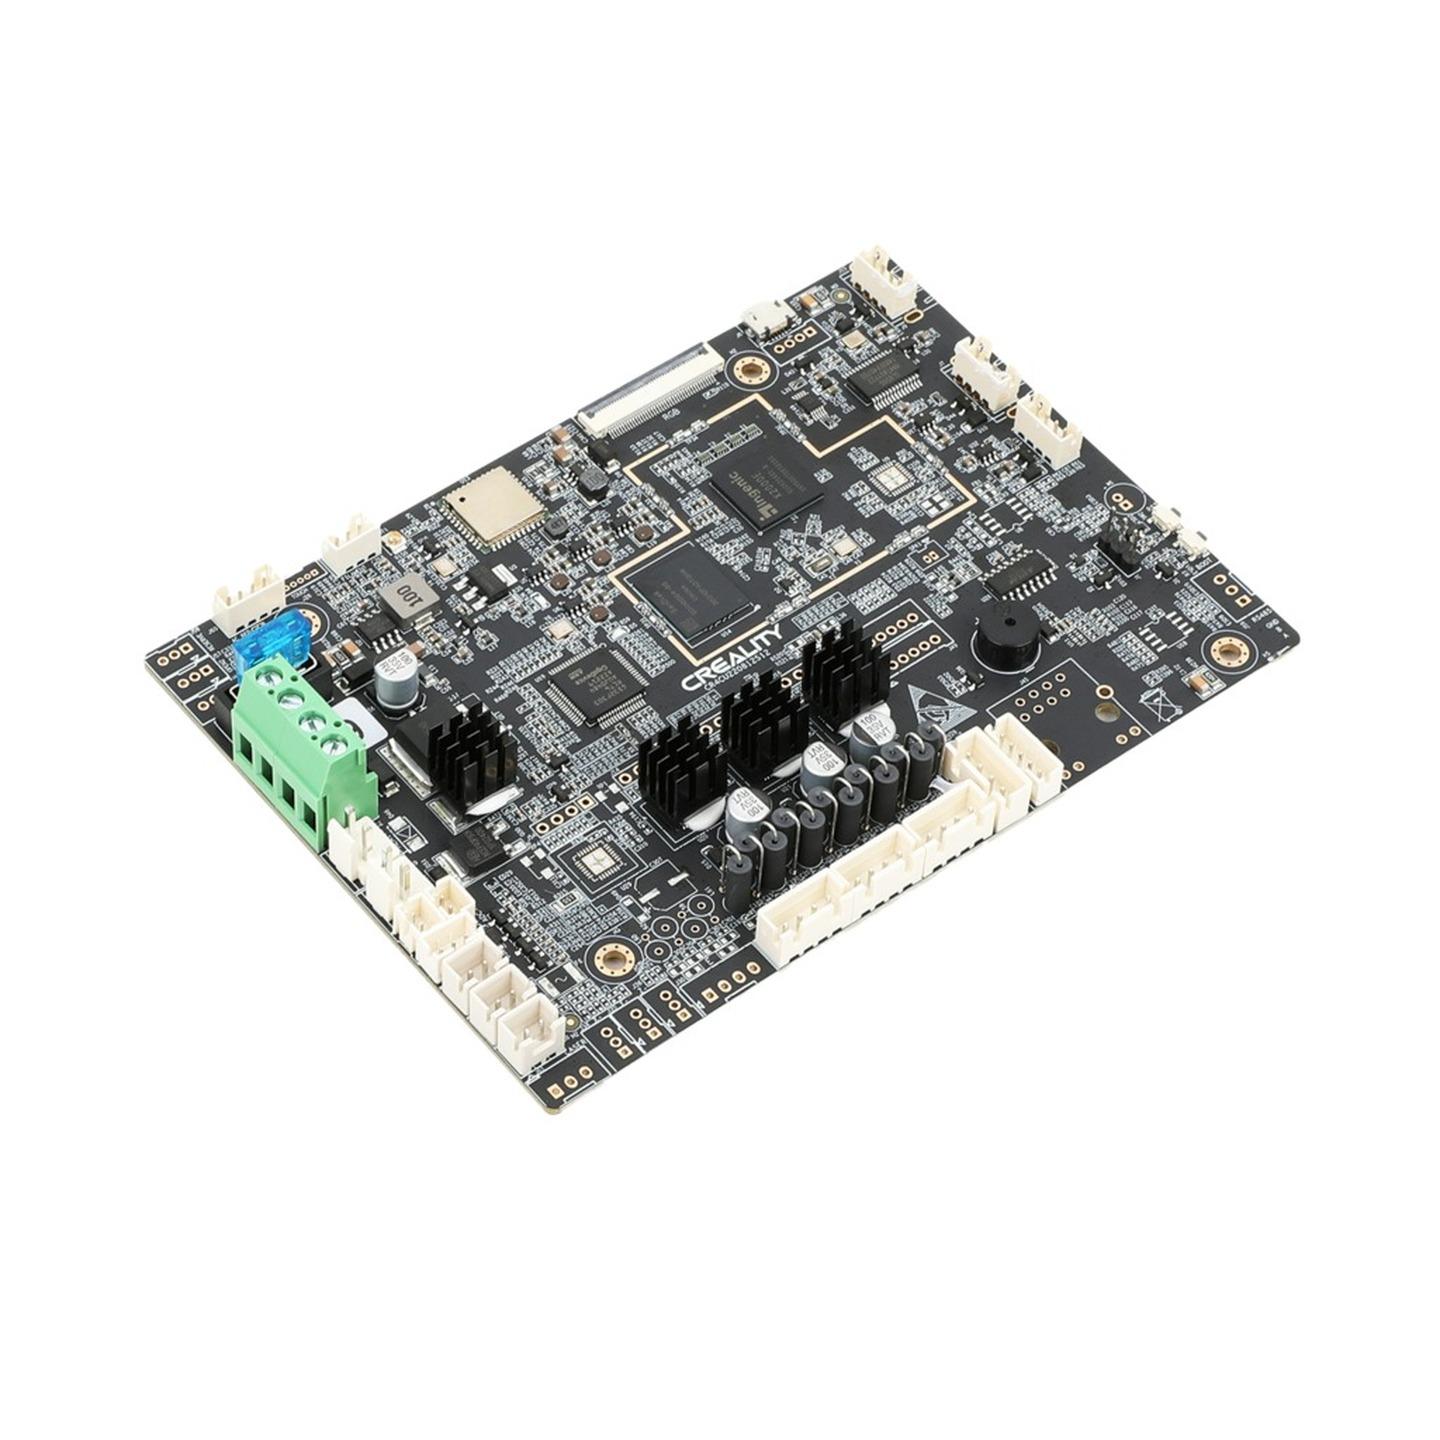 Replacement Mainboard Kit for K1 3D Printer